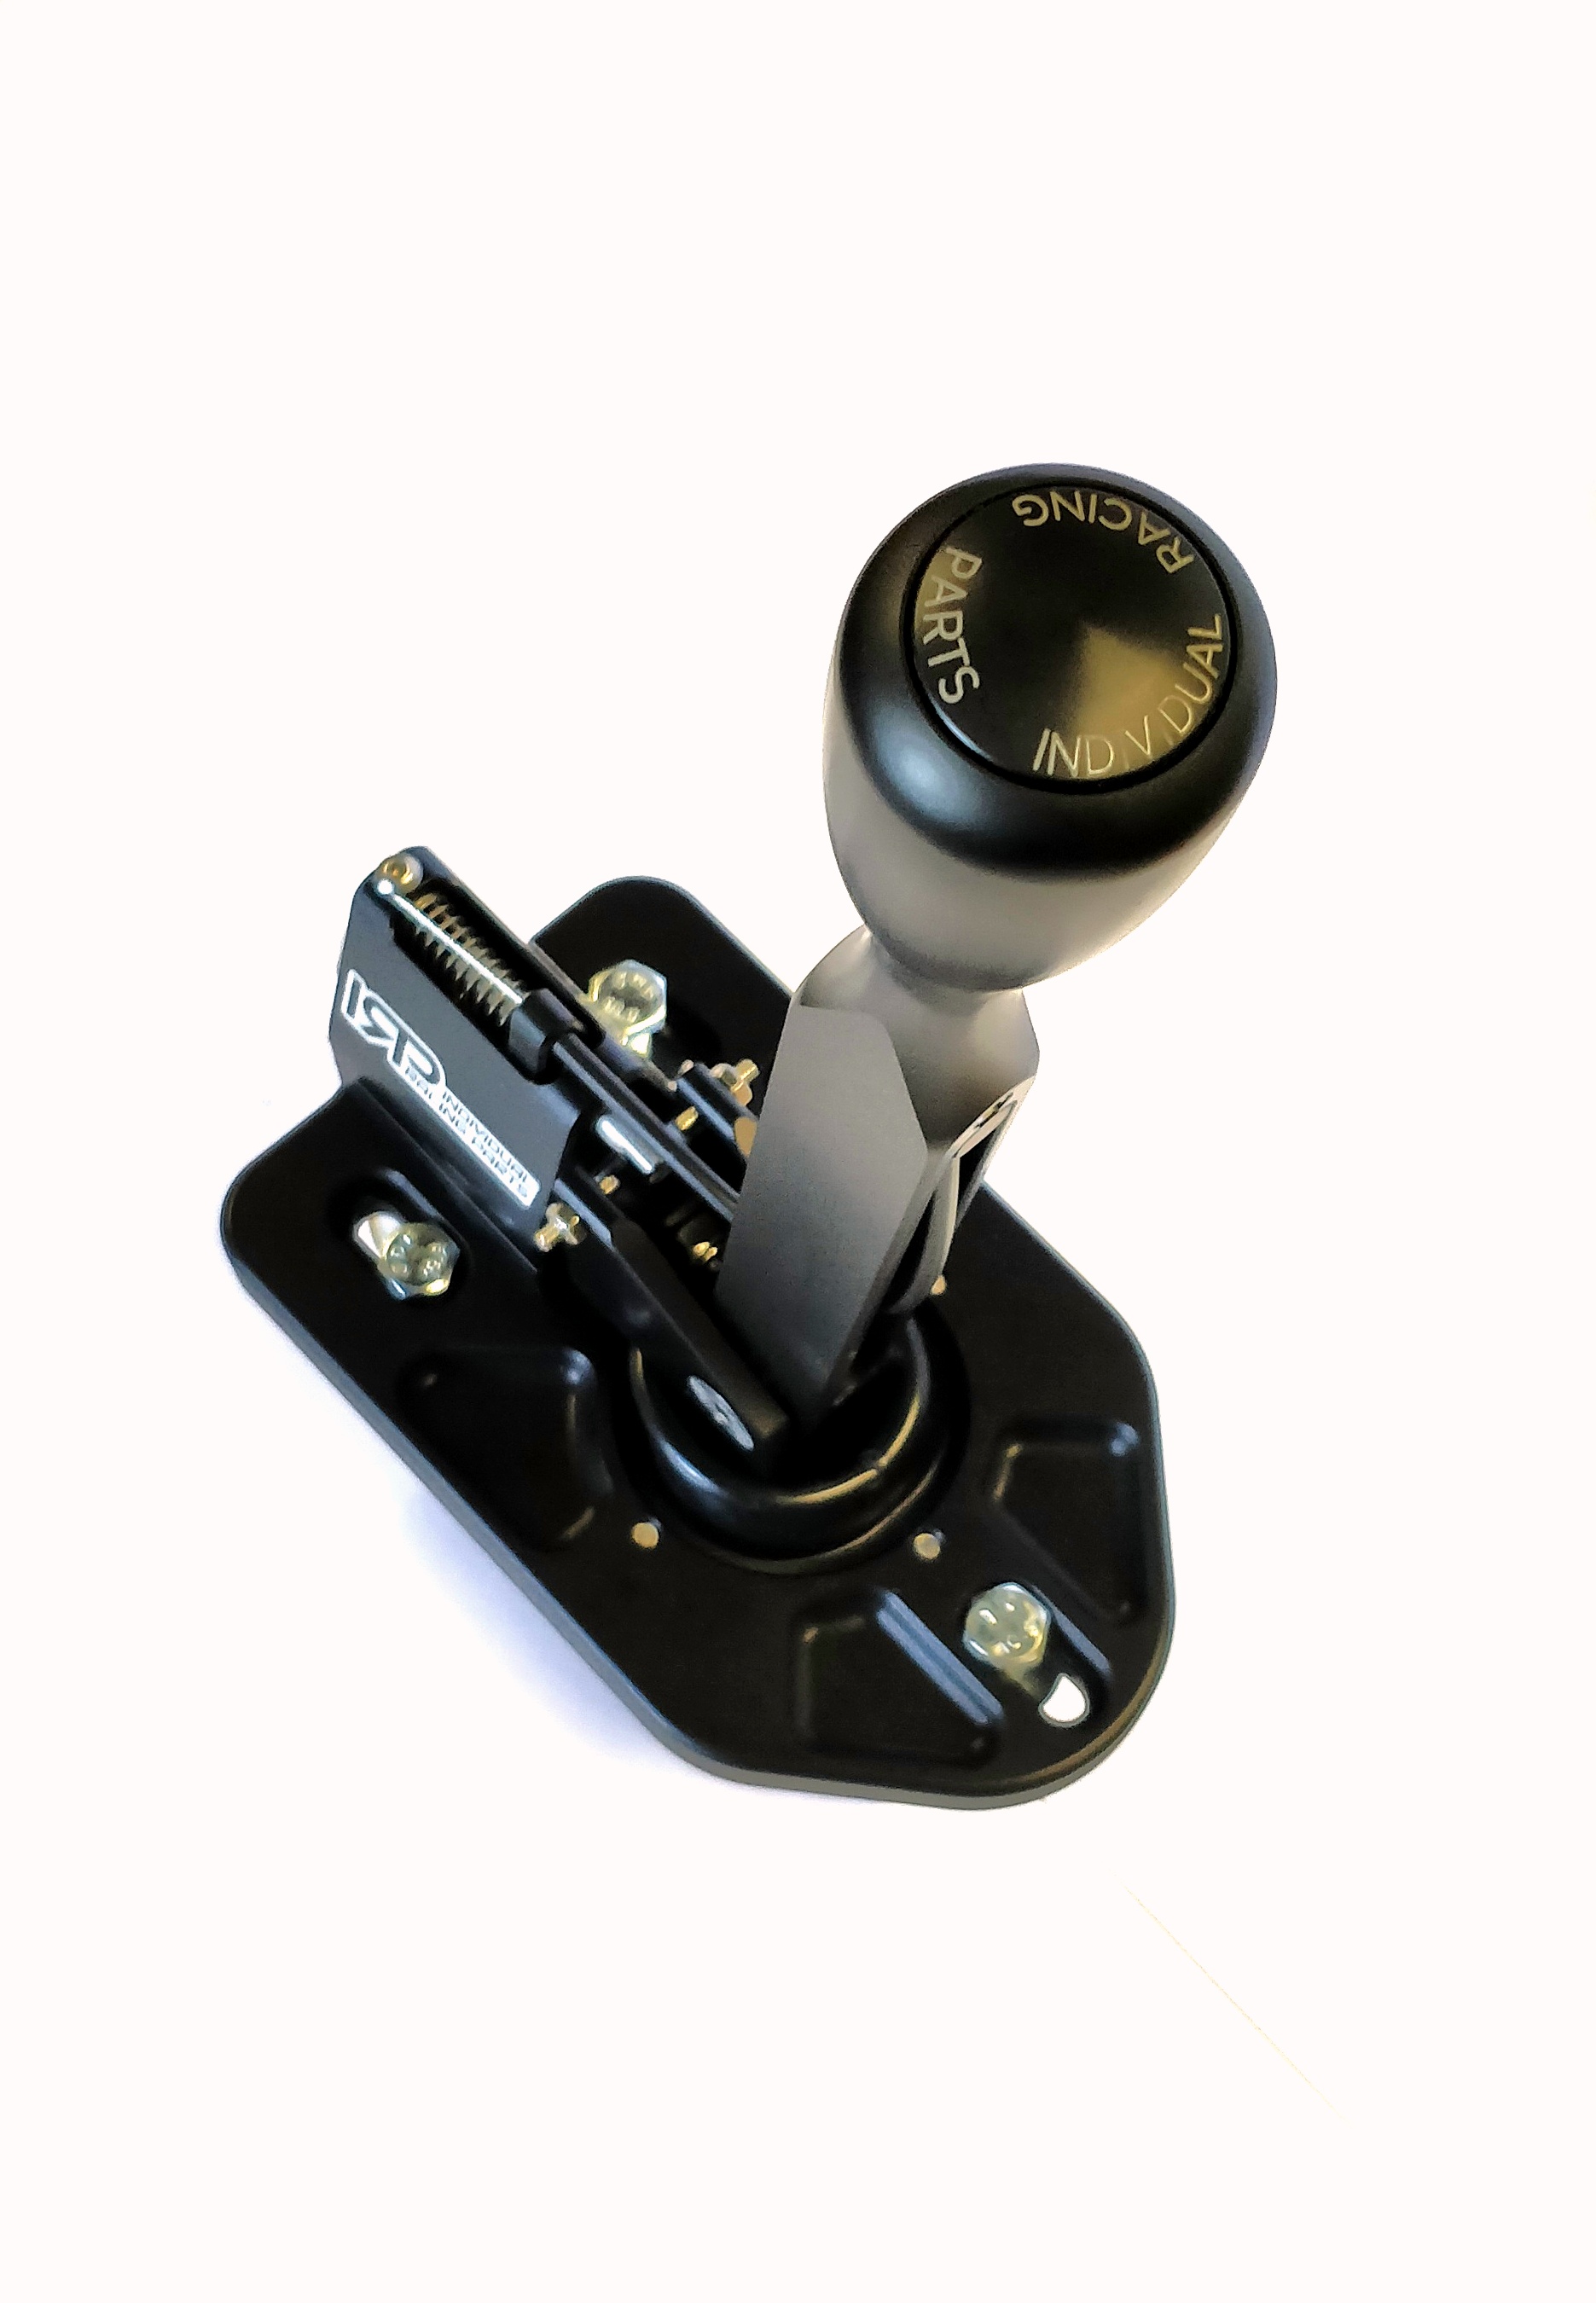 Short shifter for BMW E46 by IRP - Individual Racing Parts